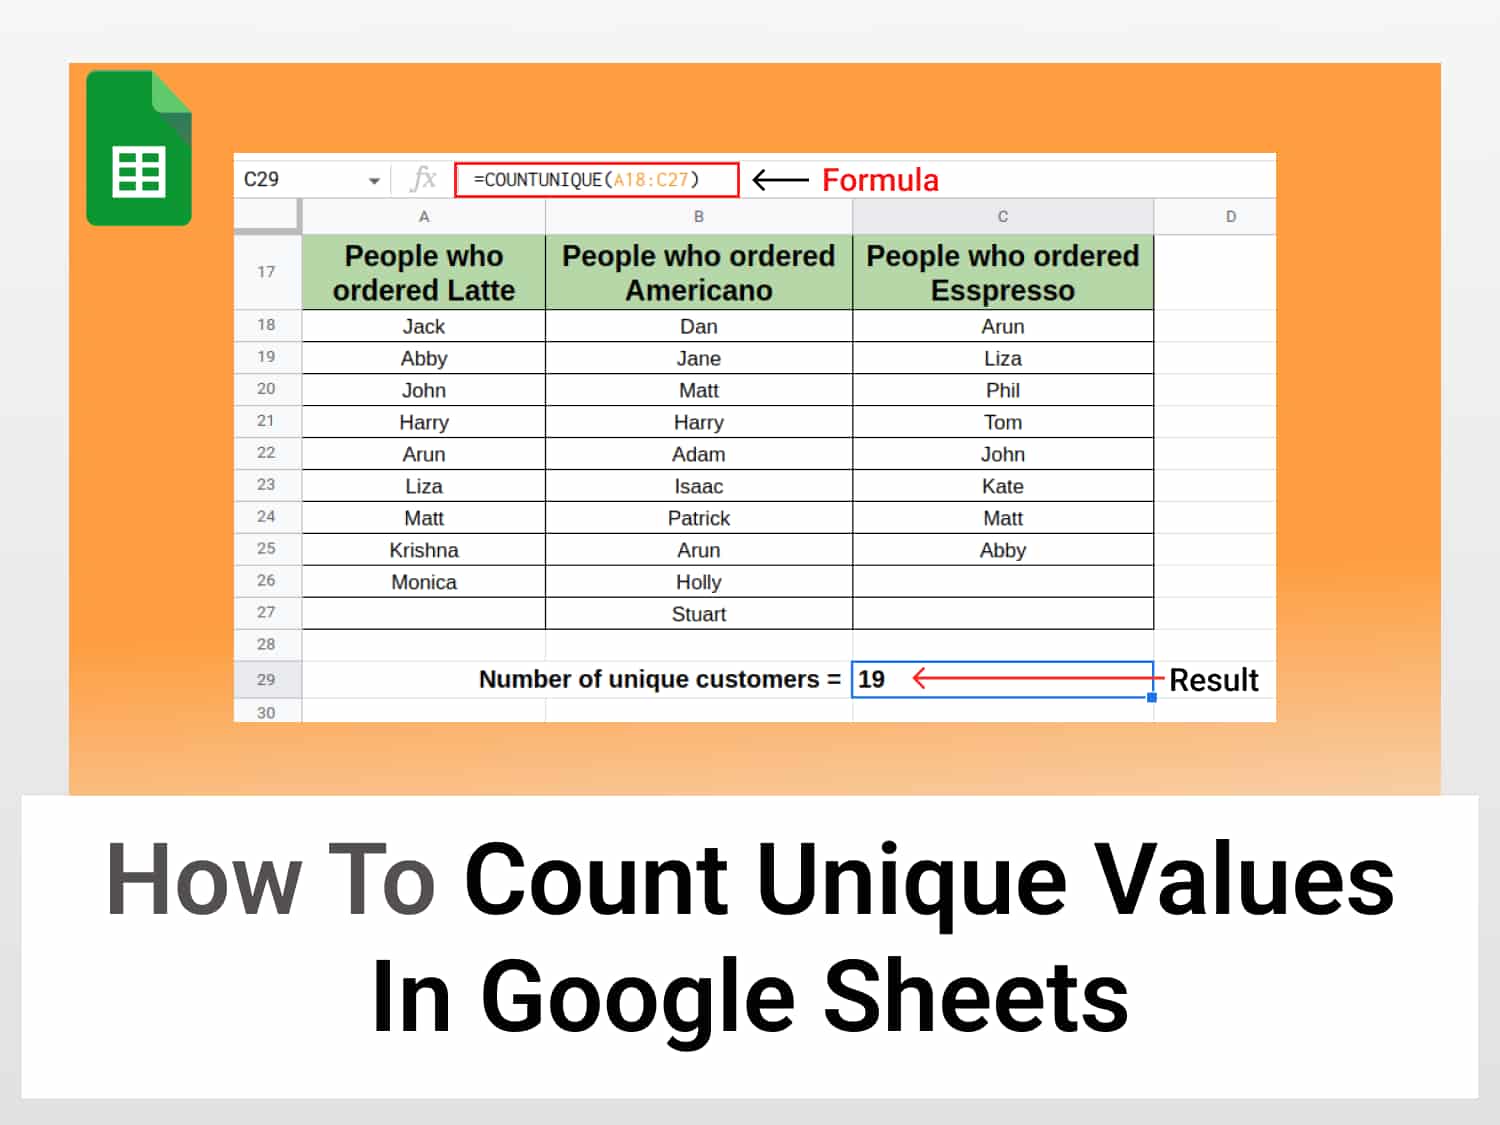 How to count unique values in Google Sheets